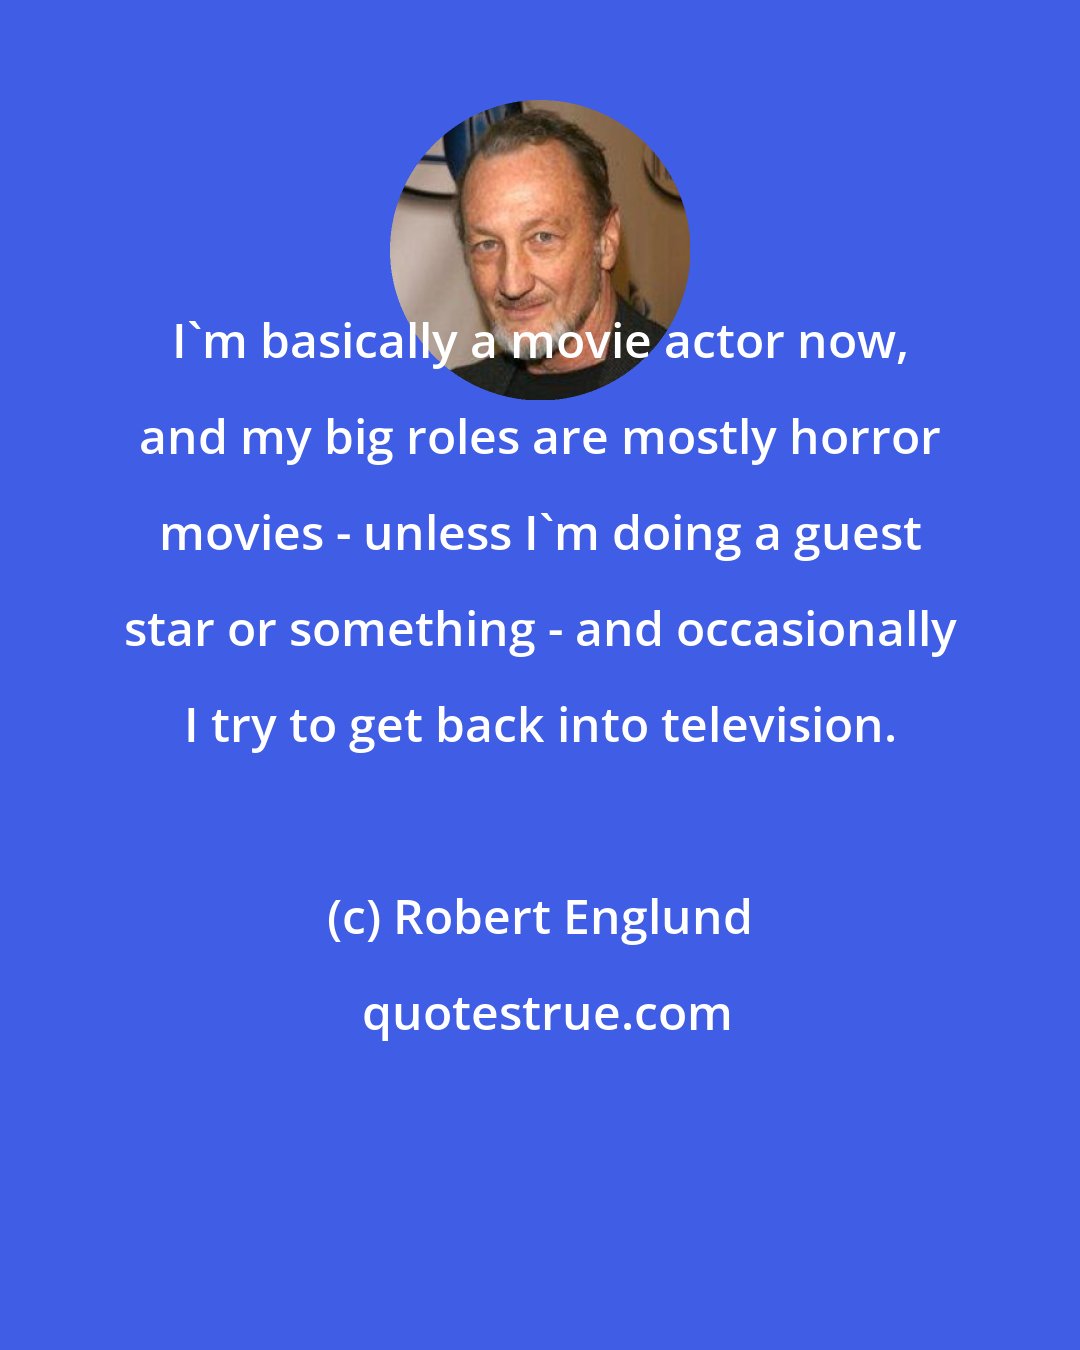 Robert Englund: I'm basically a movie actor now, and my big roles are mostly horror movies - unless I'm doing a guest star or something - and occasionally I try to get back into television.